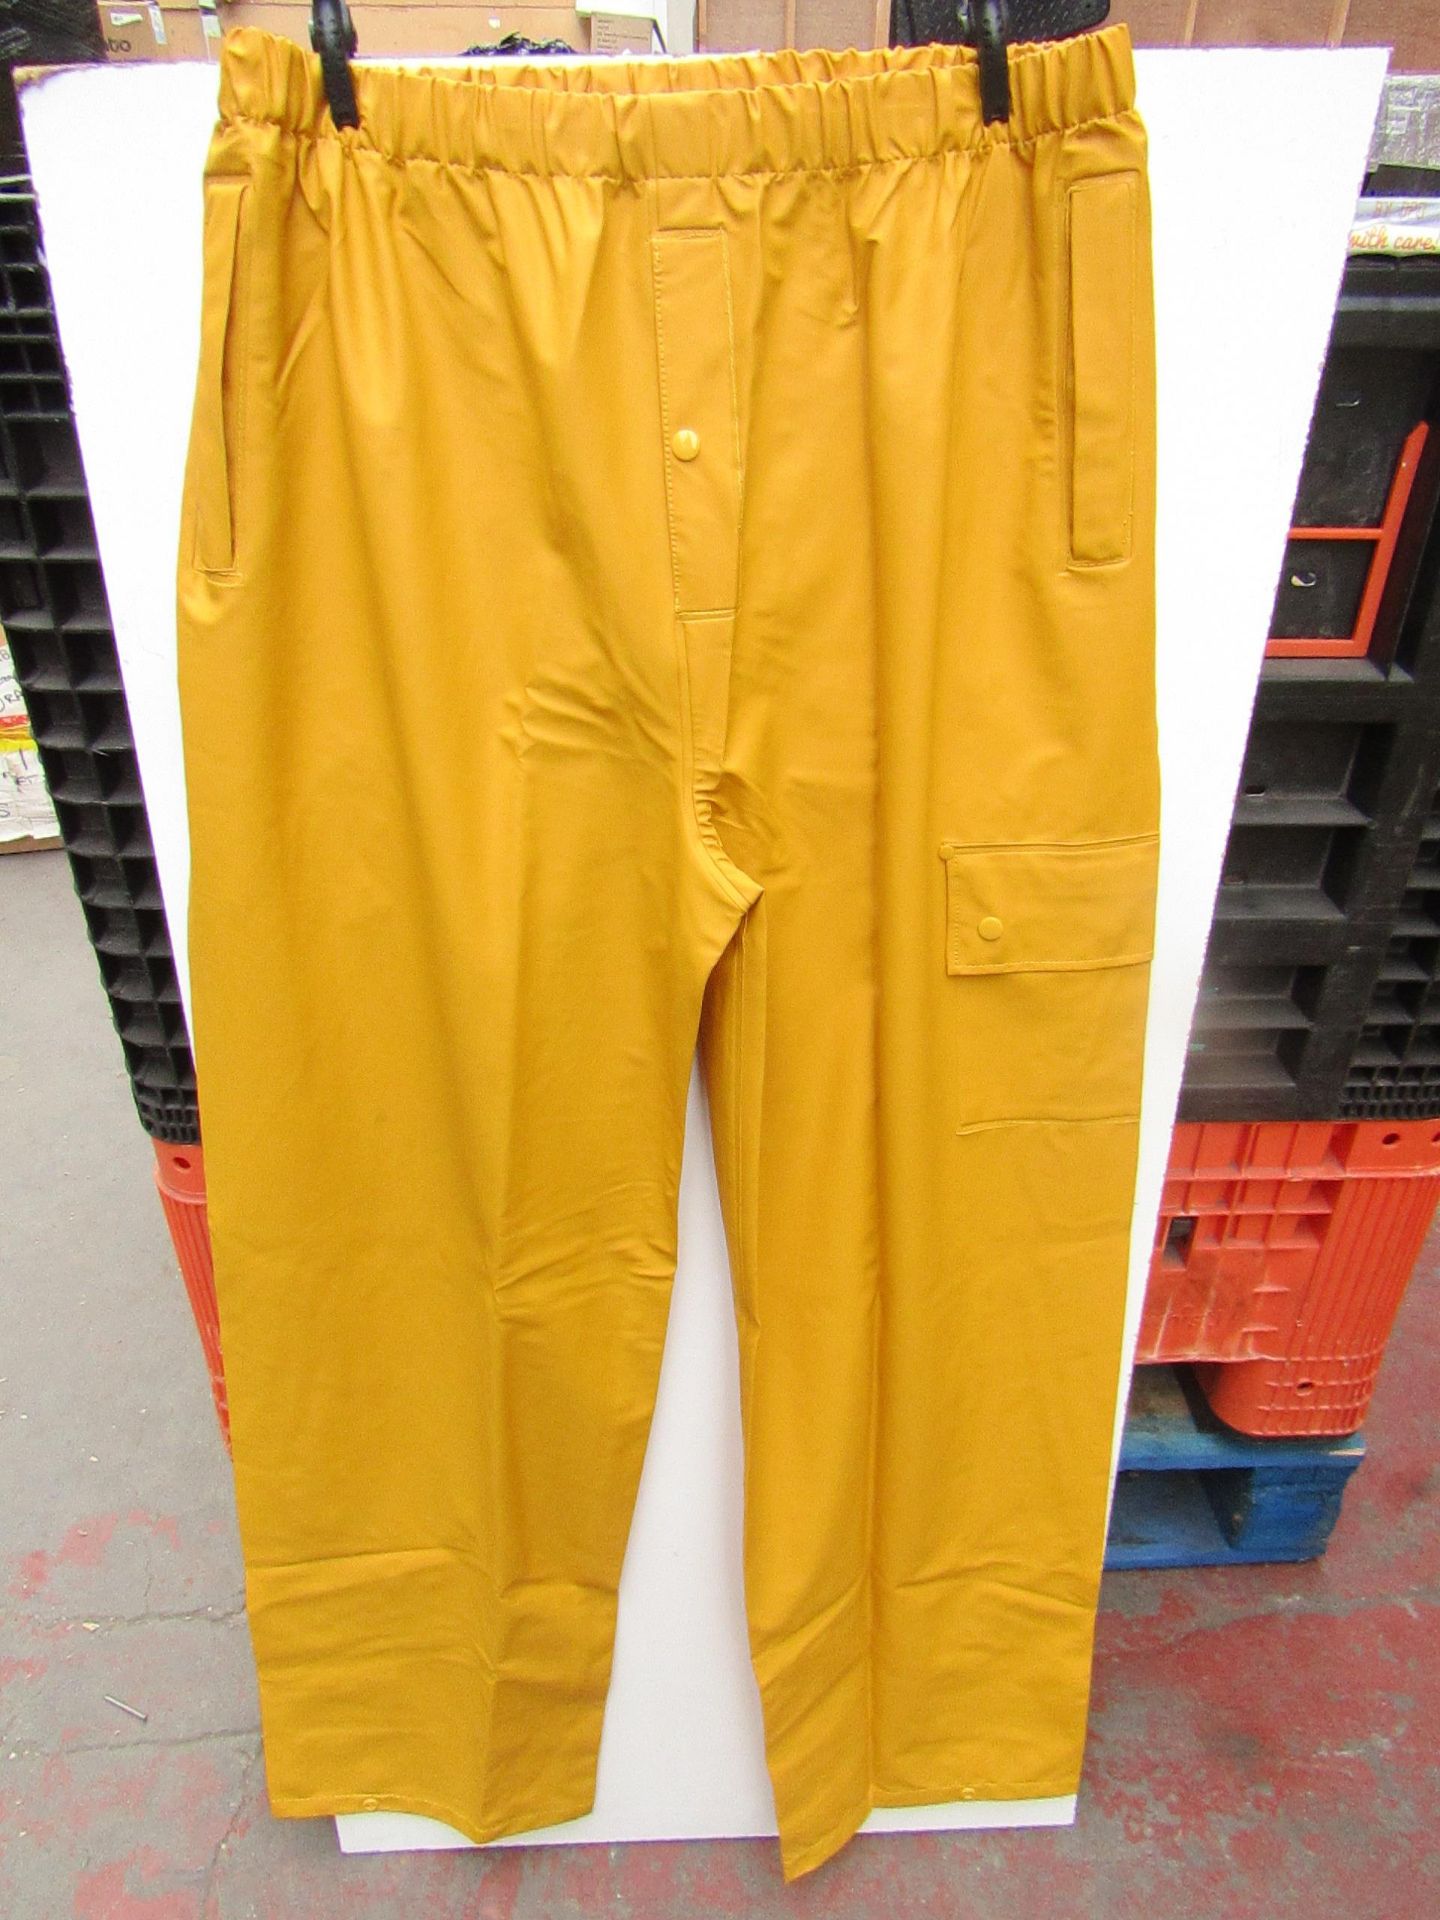 PVC Work Trousers - Light Yellow Mustard - Size XL - Unused & Packaged.